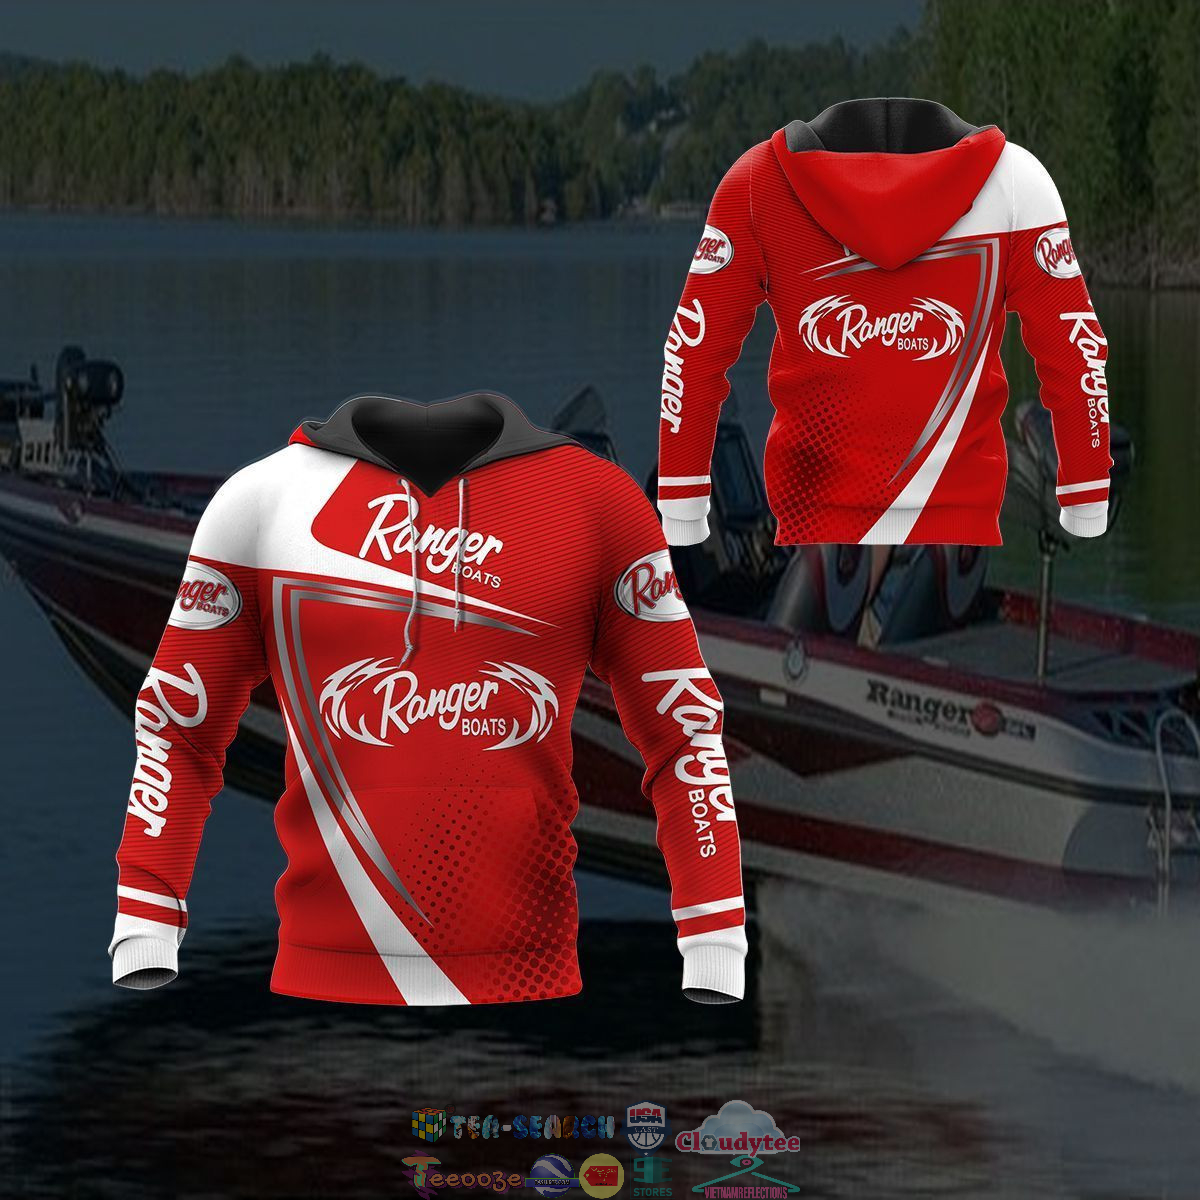 Ranger Boats ver 6 3D hoodie and t-shirt